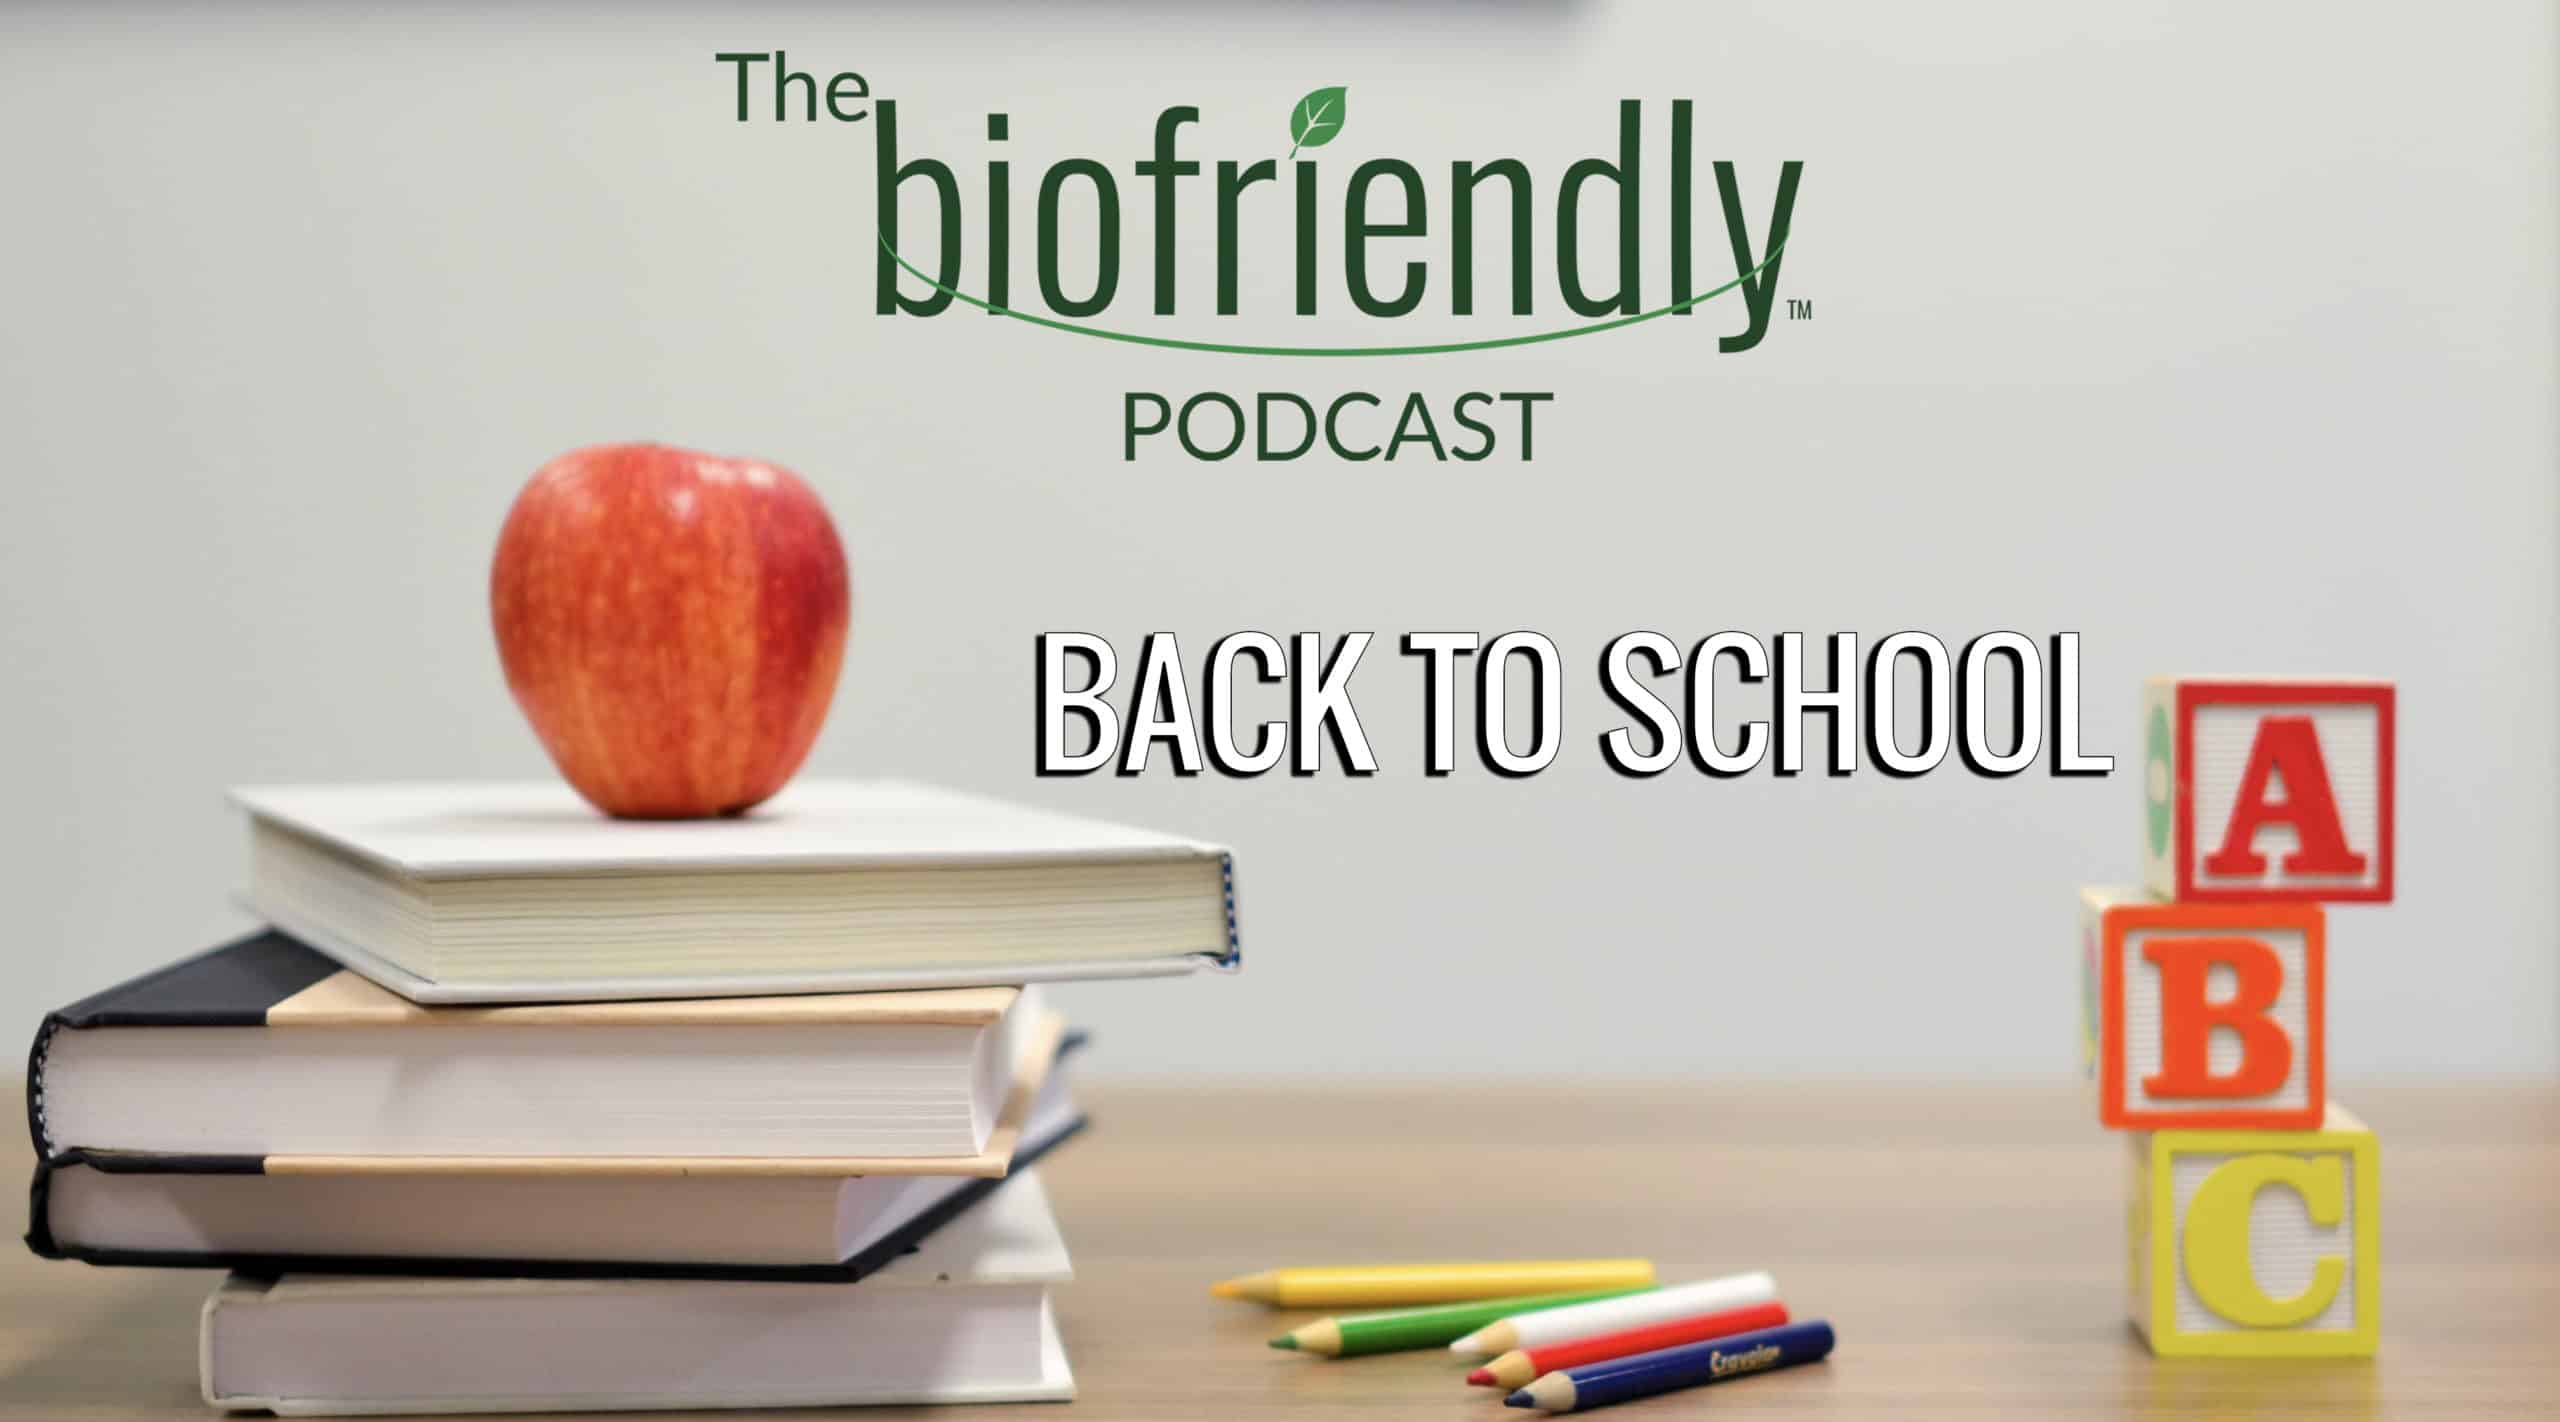 The Biofriendly Podcast - Episode 27 - Back To School